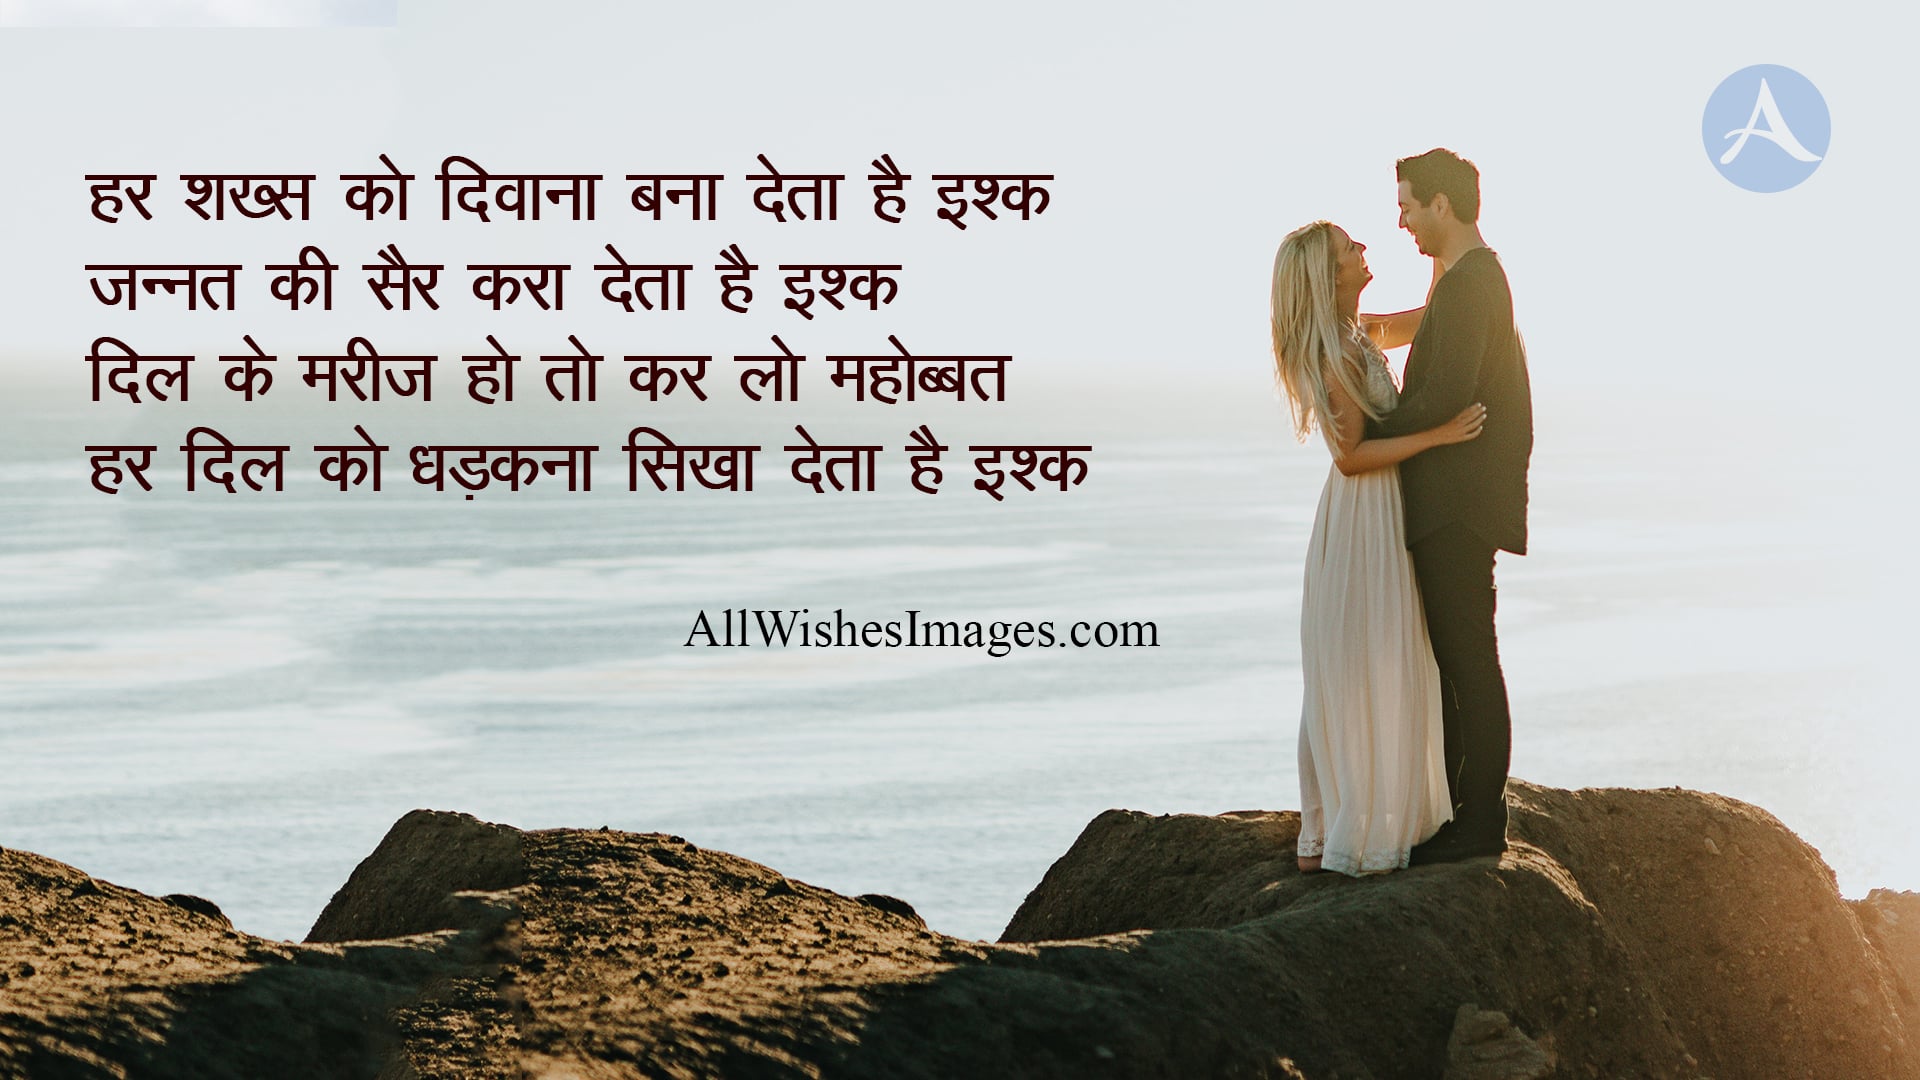 Facebook Love Shayari With Images - All Wishes Images - Images for WhatsApp